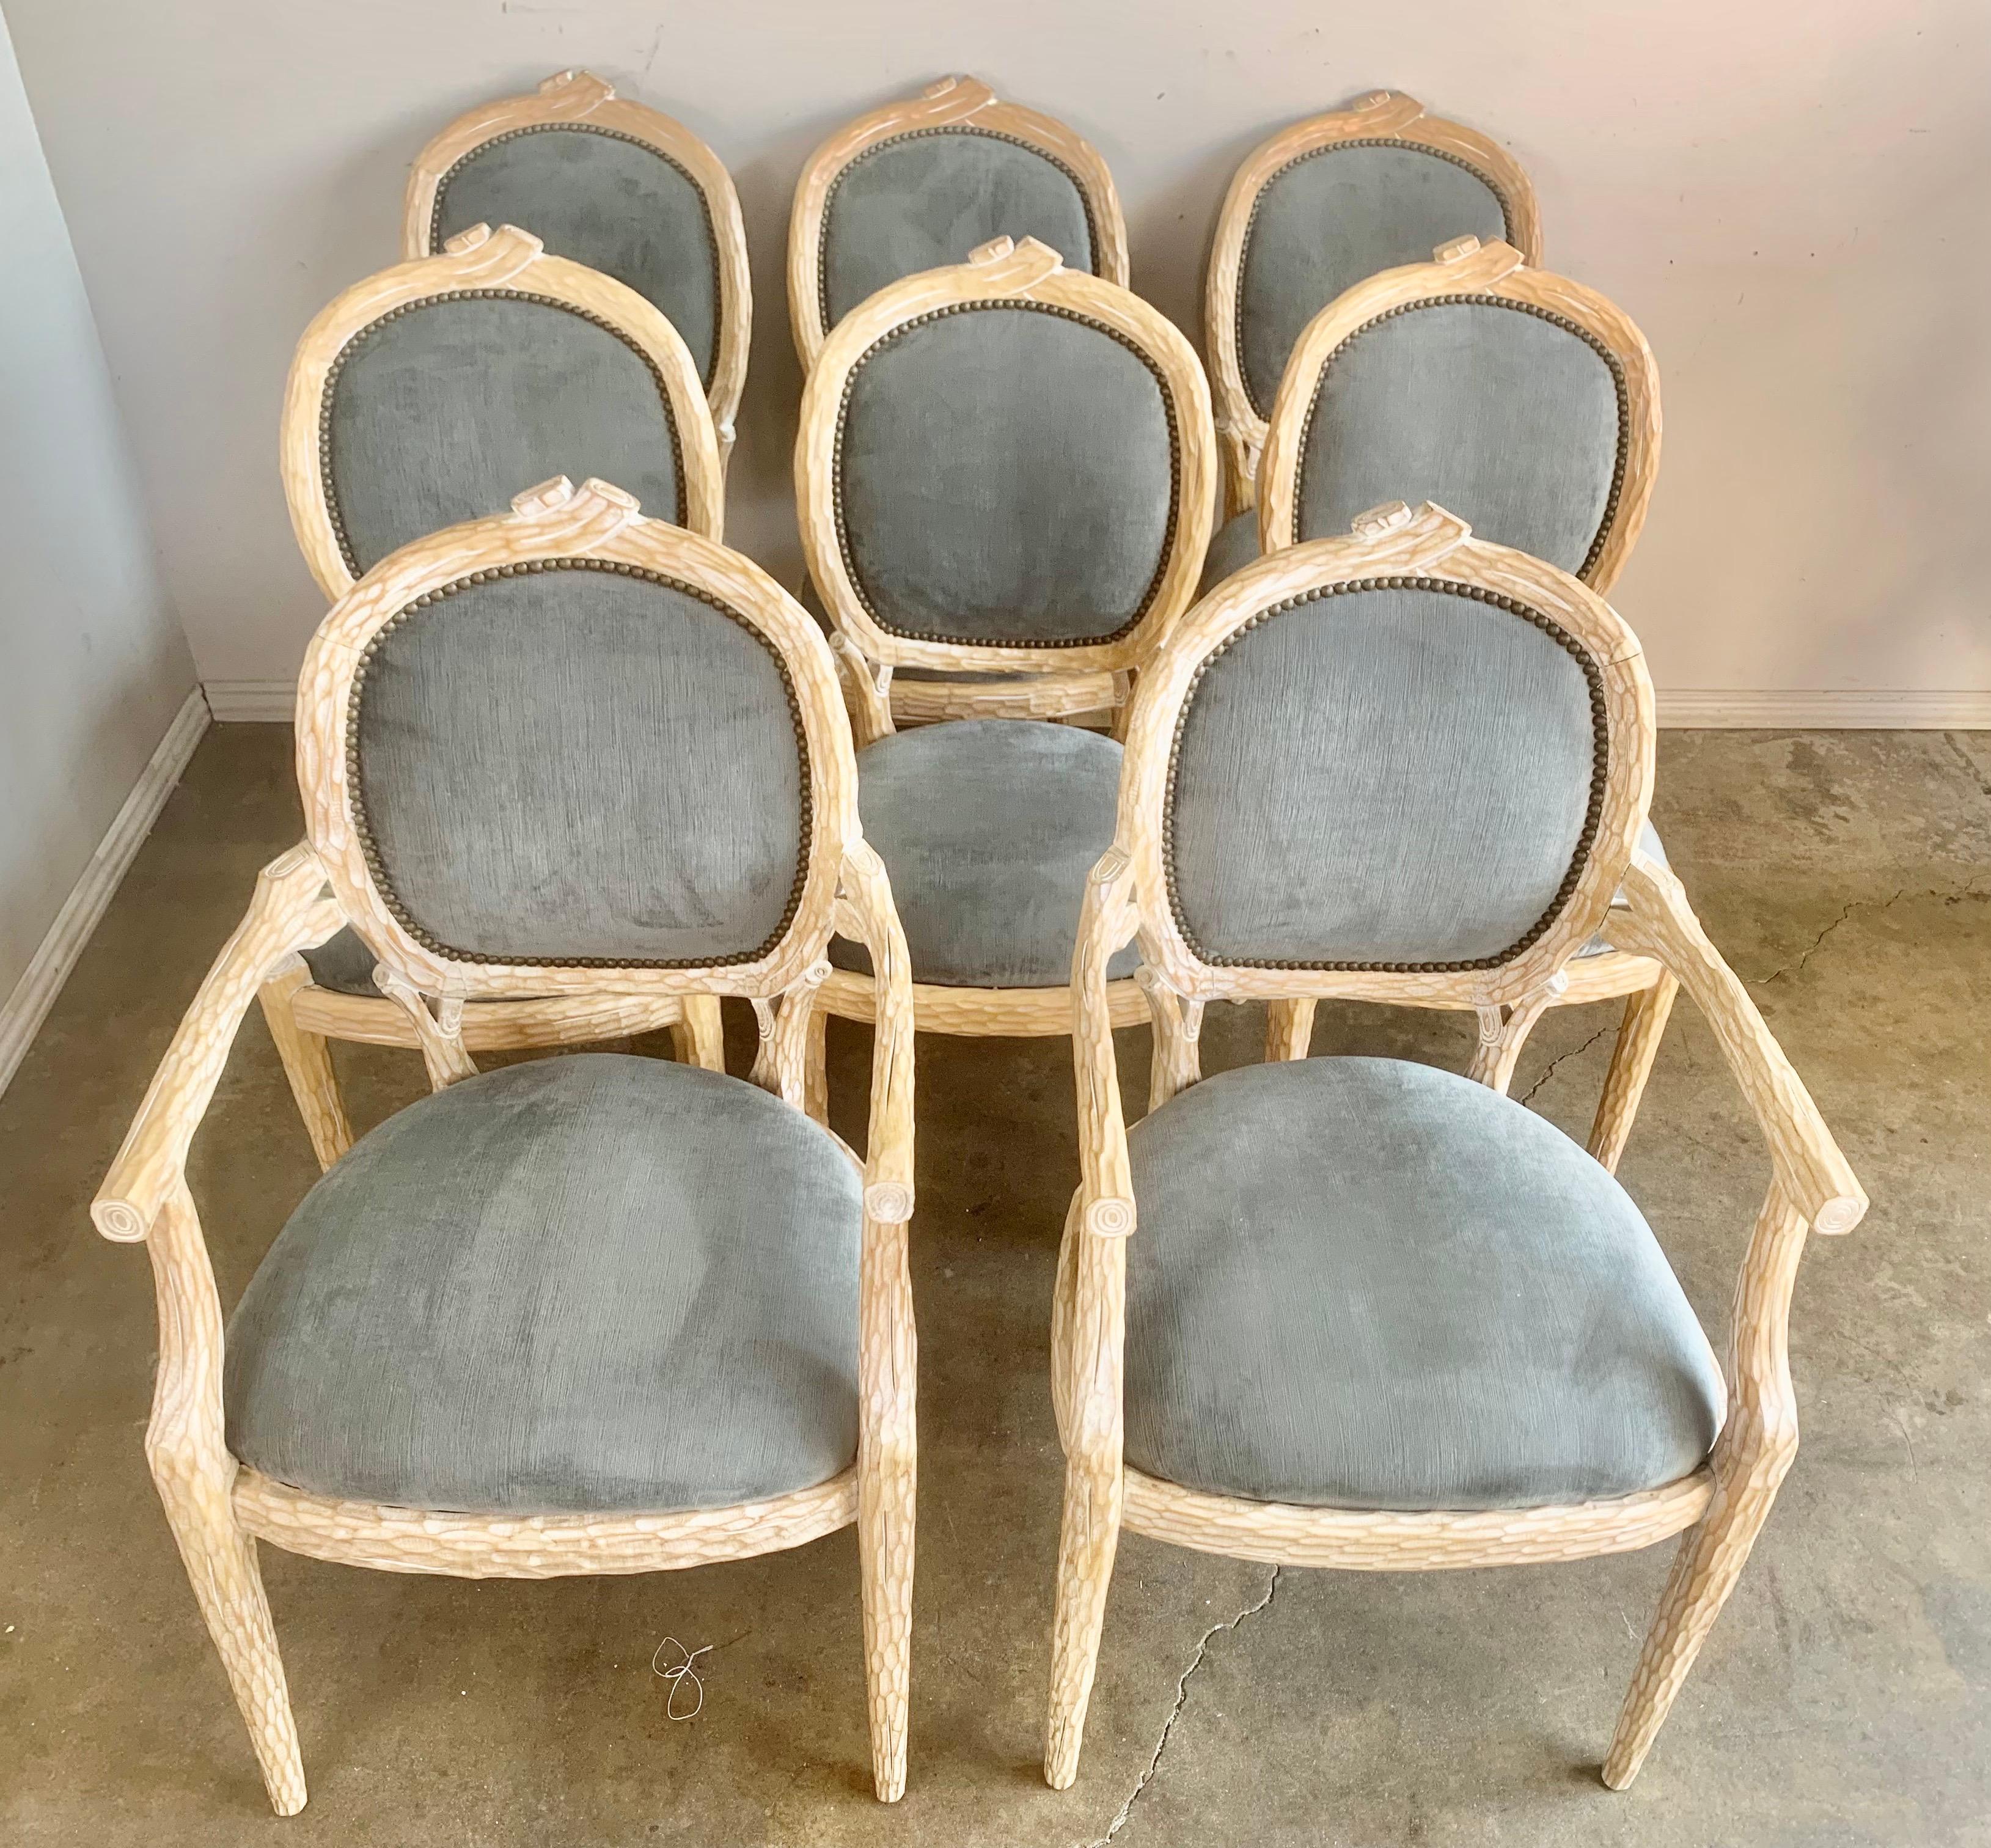 Set of (8) dining chairs carved to look like branches from a tree. The beautiful natural wood finish add to the natural look of the chairs. The dining chairs are newly upholstered in blue velvet with brass nailheads.

Size of armchairs: 38